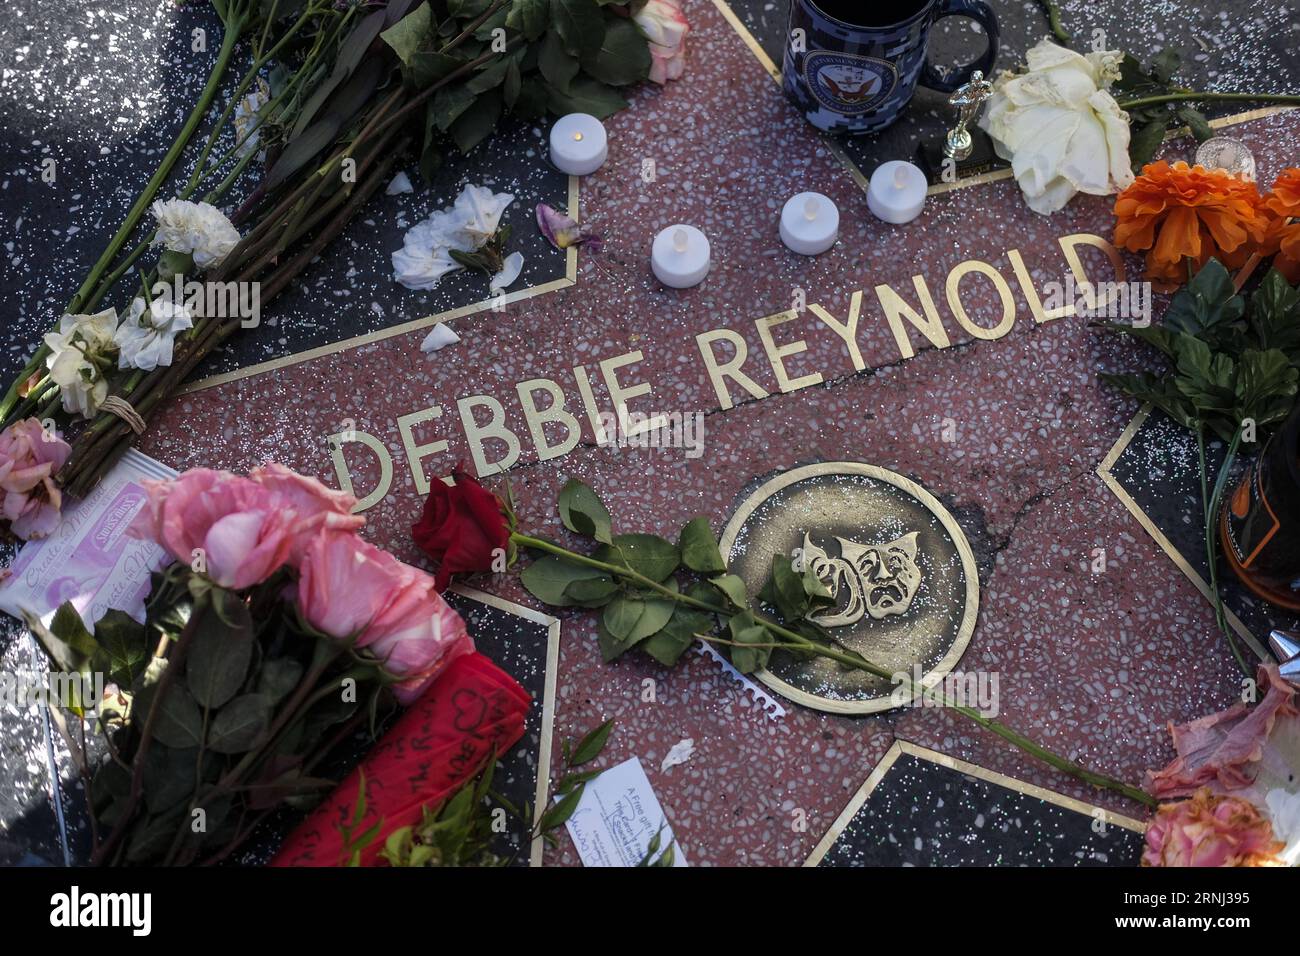 LOS ANGELES, Dec. 29, 2016 -- Flowers and candles surround the Hollywood Walk of Fame star of Debbie Reynolds, in Los Angeles, California, the United States, on Dec. 29, 2016. Hollywood star Debbie Reynolds died of stroke Wednesday at the age of 84, one day after her daughter Carrie Fisher s death. Carrie Fisher, the actress best known as Princess Leia in the Star Wars movie franchise, died at the age of 60 on Tuesday morning, after suffering a heart attack on a flight last Friday. ) (zw) U.S.-LOS ANGELES-DEBBIE REYNOLDS-CARRIE FISHER-WALK OF FAME-CONDOLENCE ZhaoxHanrong PUBLICATIONxNOTxINxCHN Stock Photo